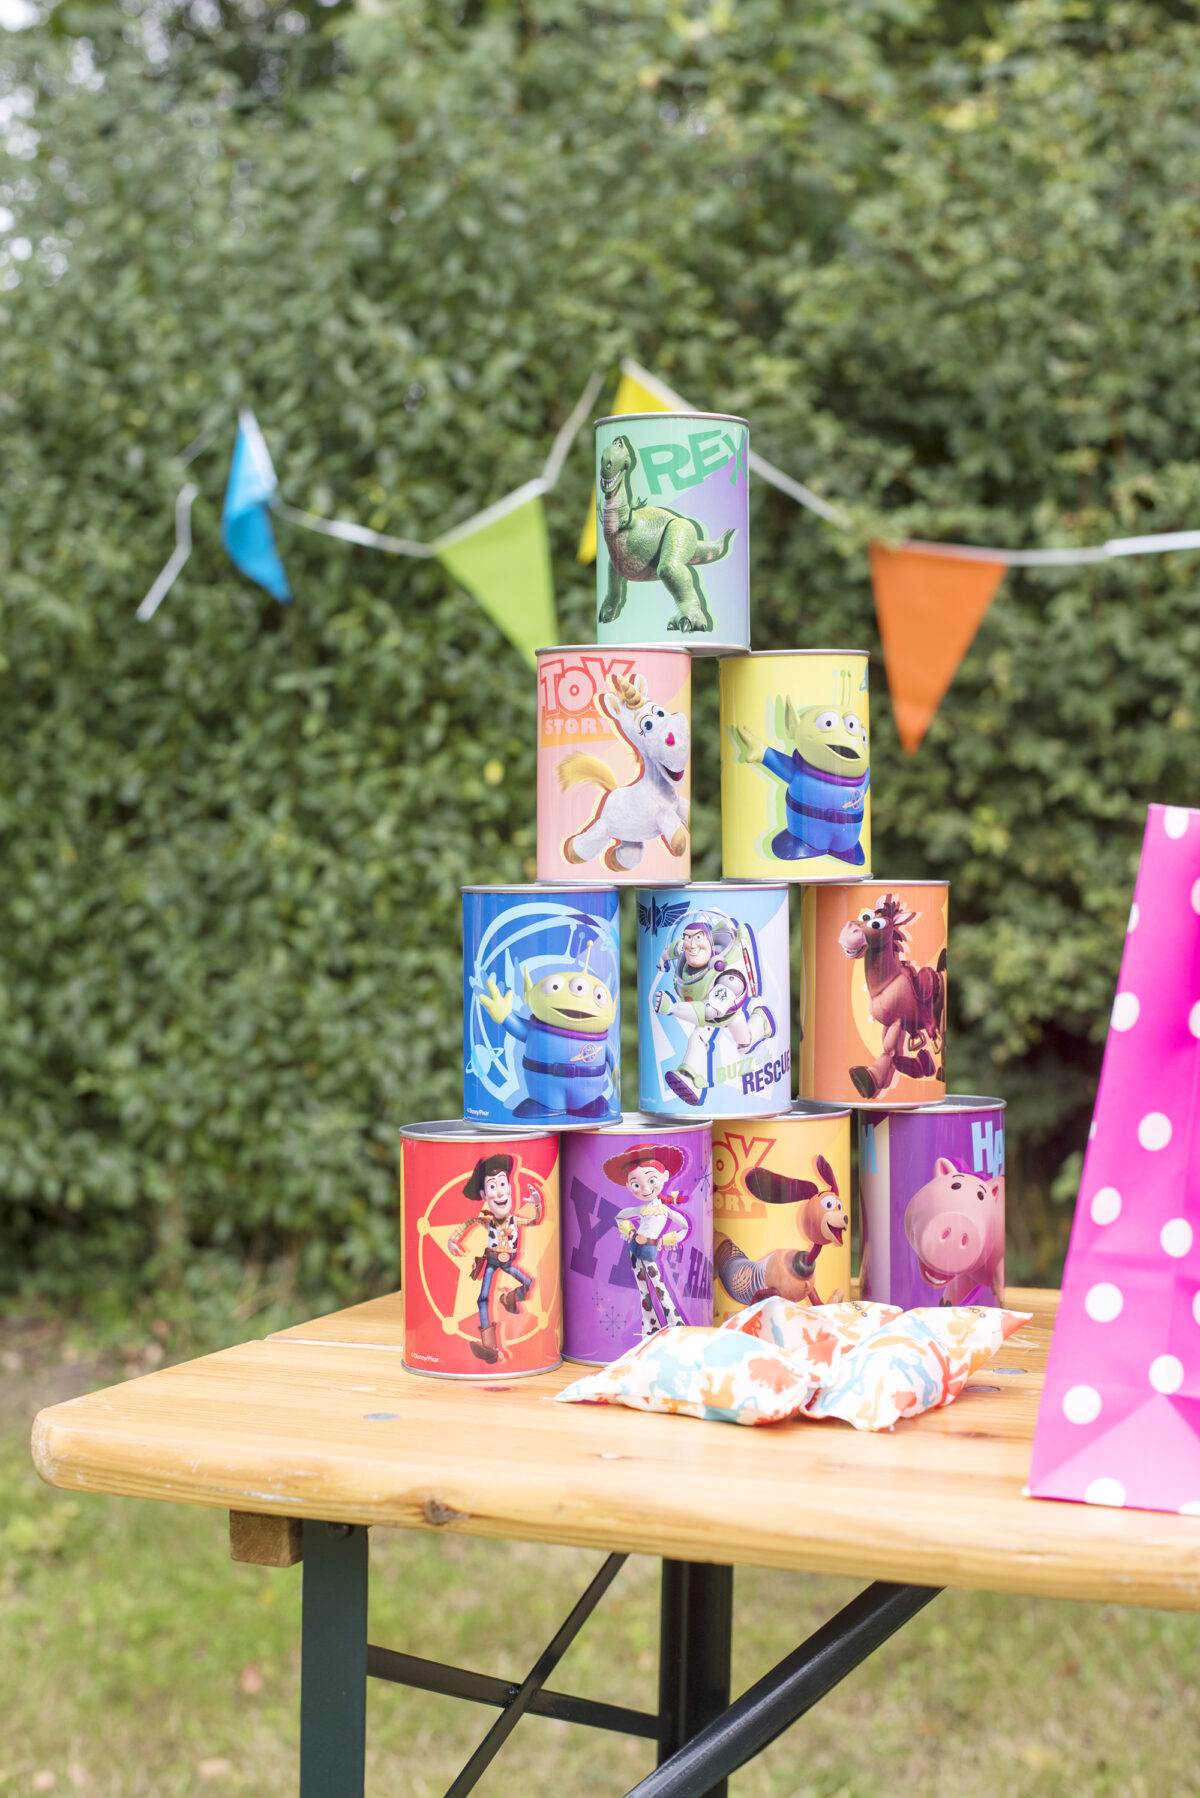 Image shows a wooden party table outside with a Toy Story themed set of knock down cans and bean bags in bright colours.  The table is outdoors in a field.